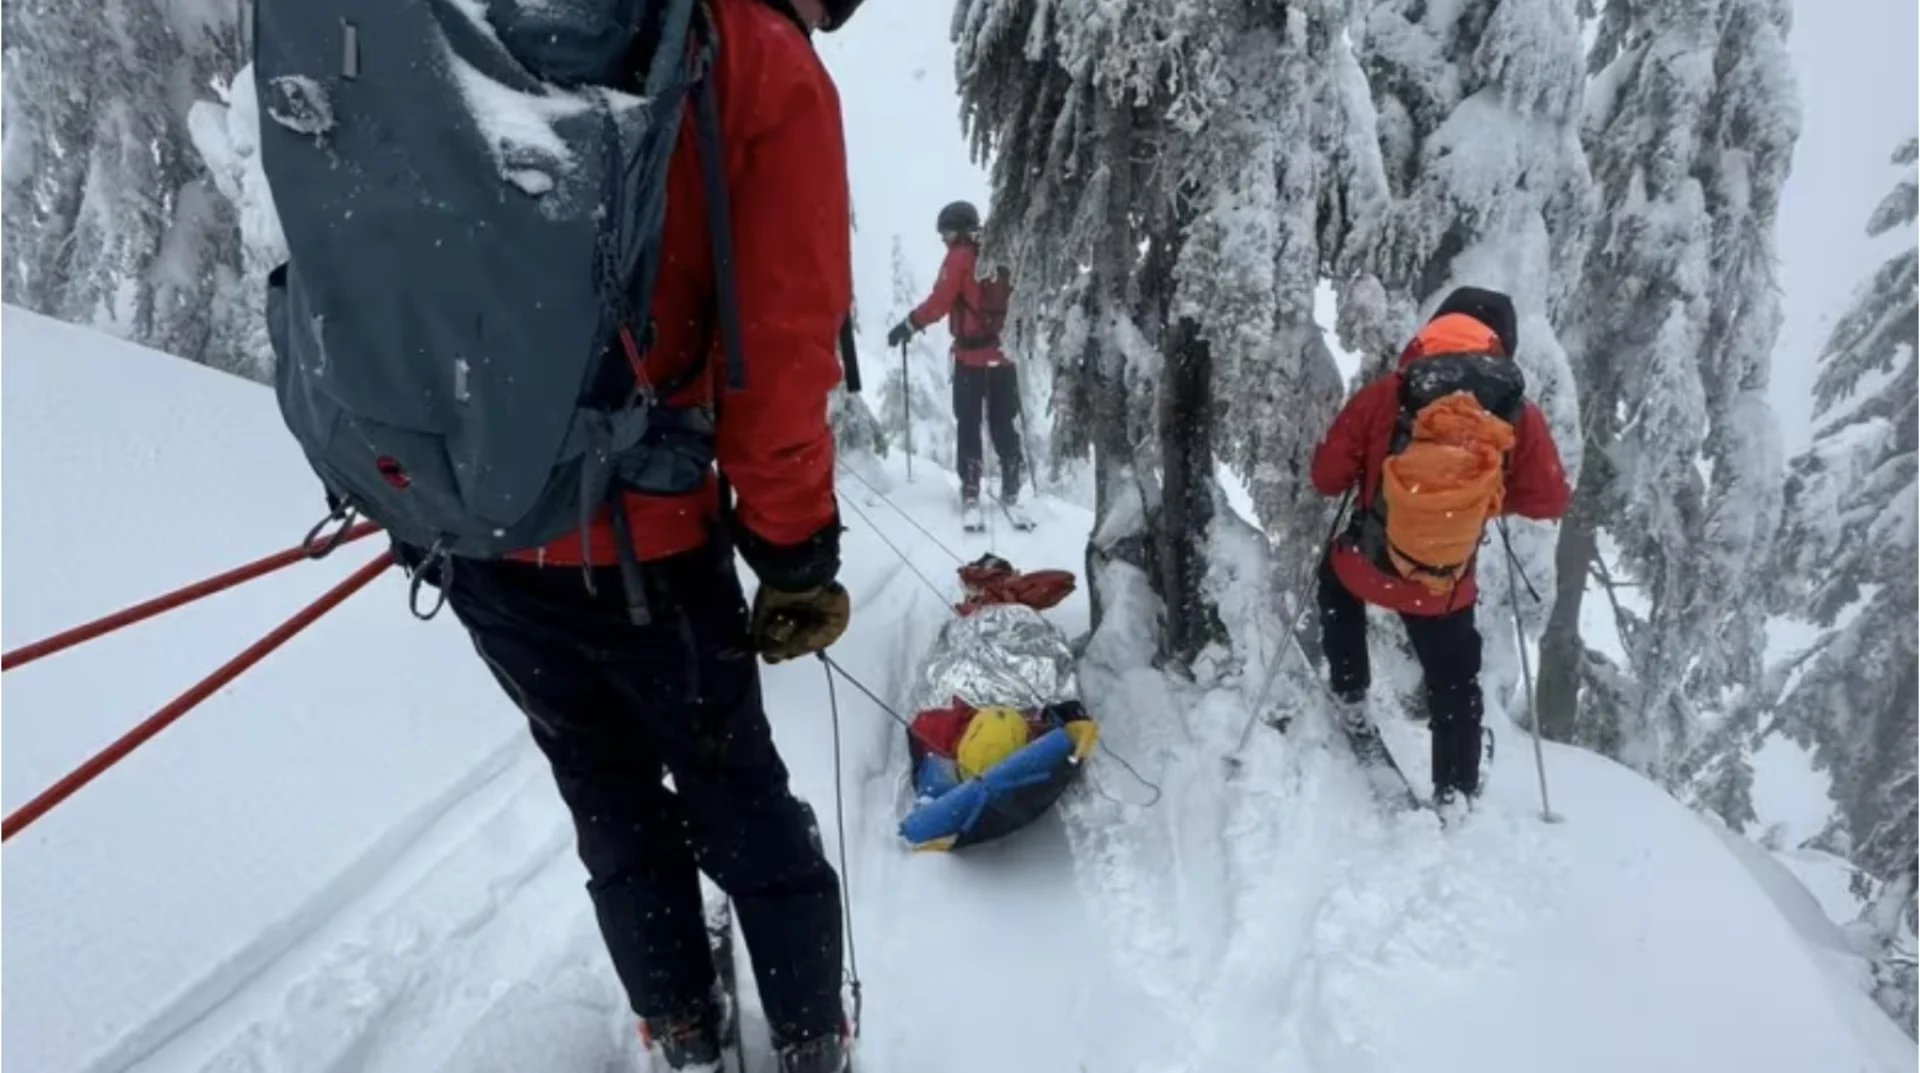 CBC: A North Shore Rescue crew moves the avalanche victim down Mount Seymour on a sled. The woman had been trapped under snow for nearly 20 minutes. (North Shore Rescue)